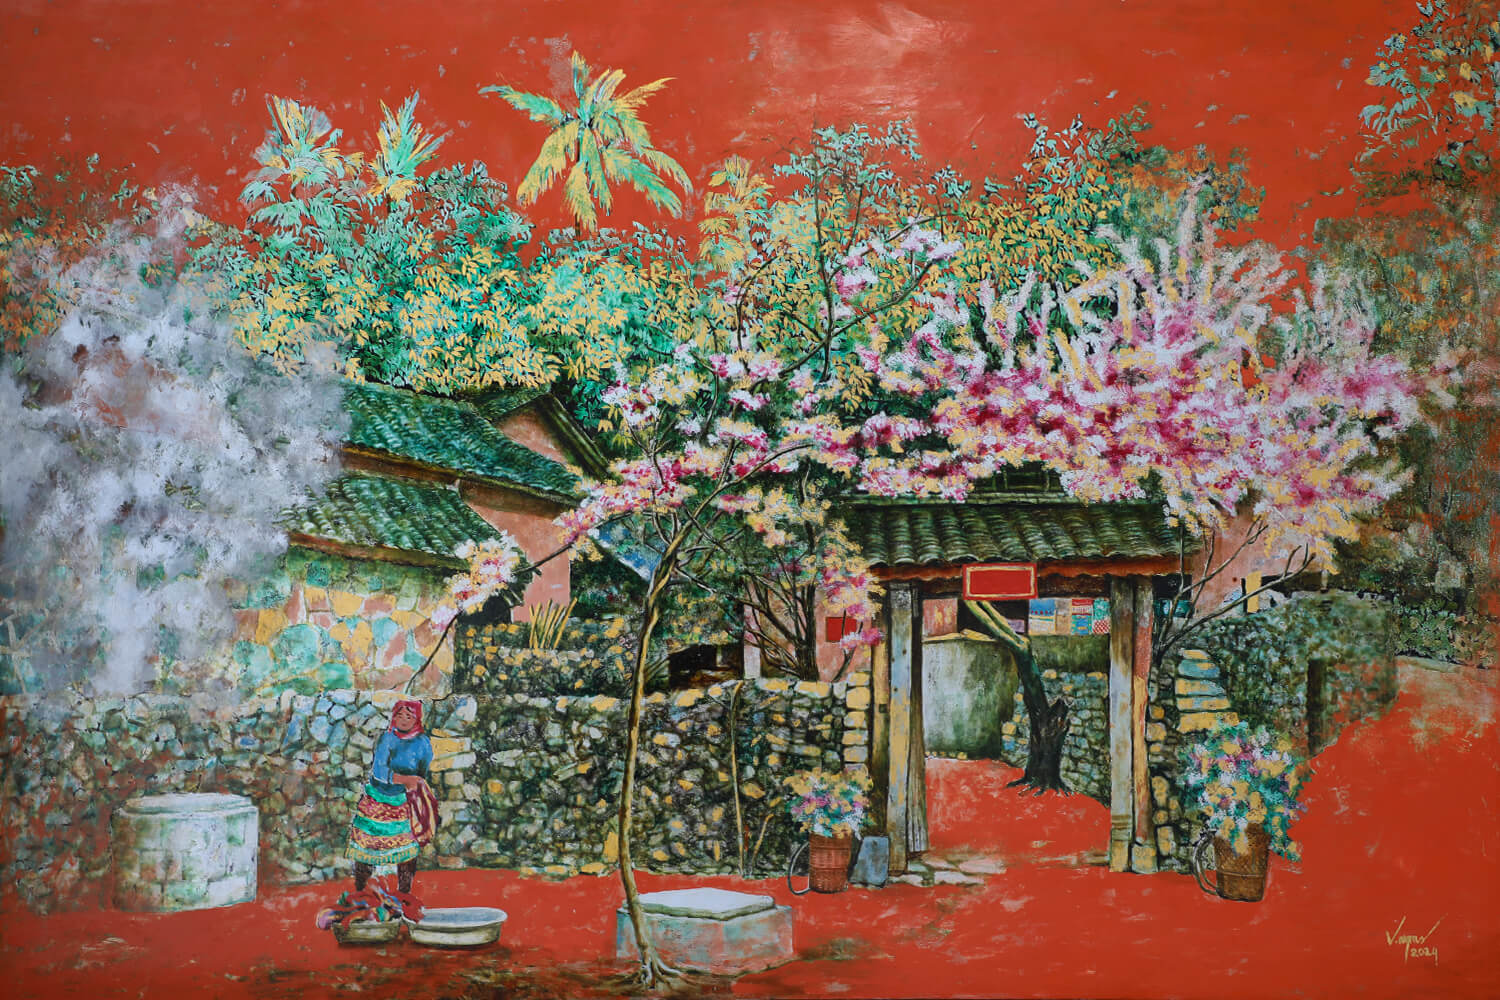 Ha Giang Landscape Vietnamese Lacquer painting by artist Nguyen Van Nghia